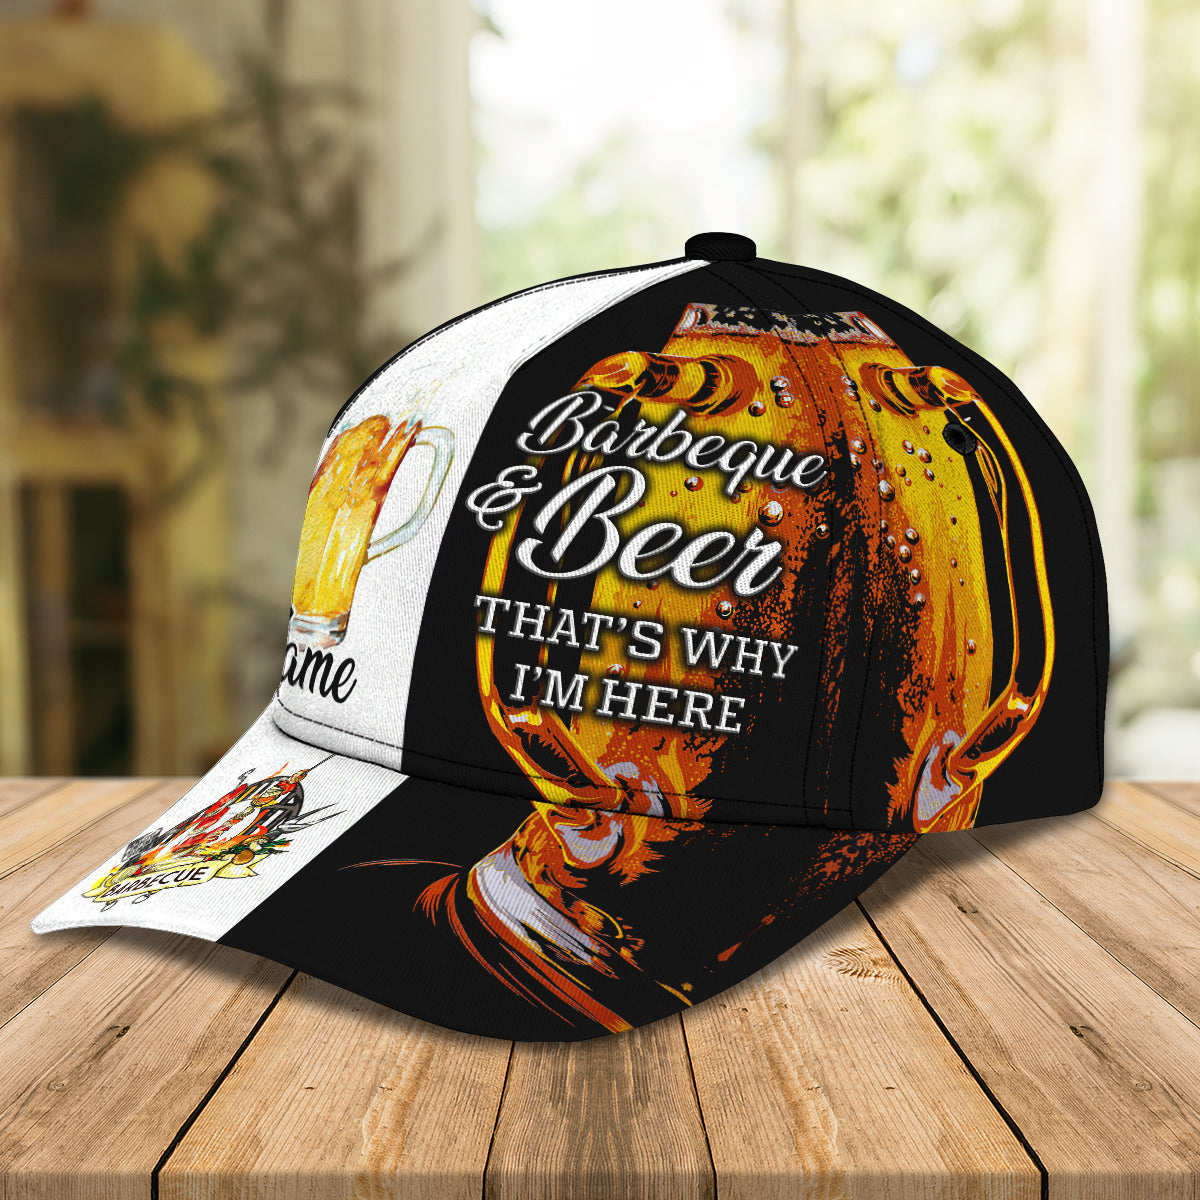 Babecue And Beer- Personalized Name Cap - Loop- T2k-264